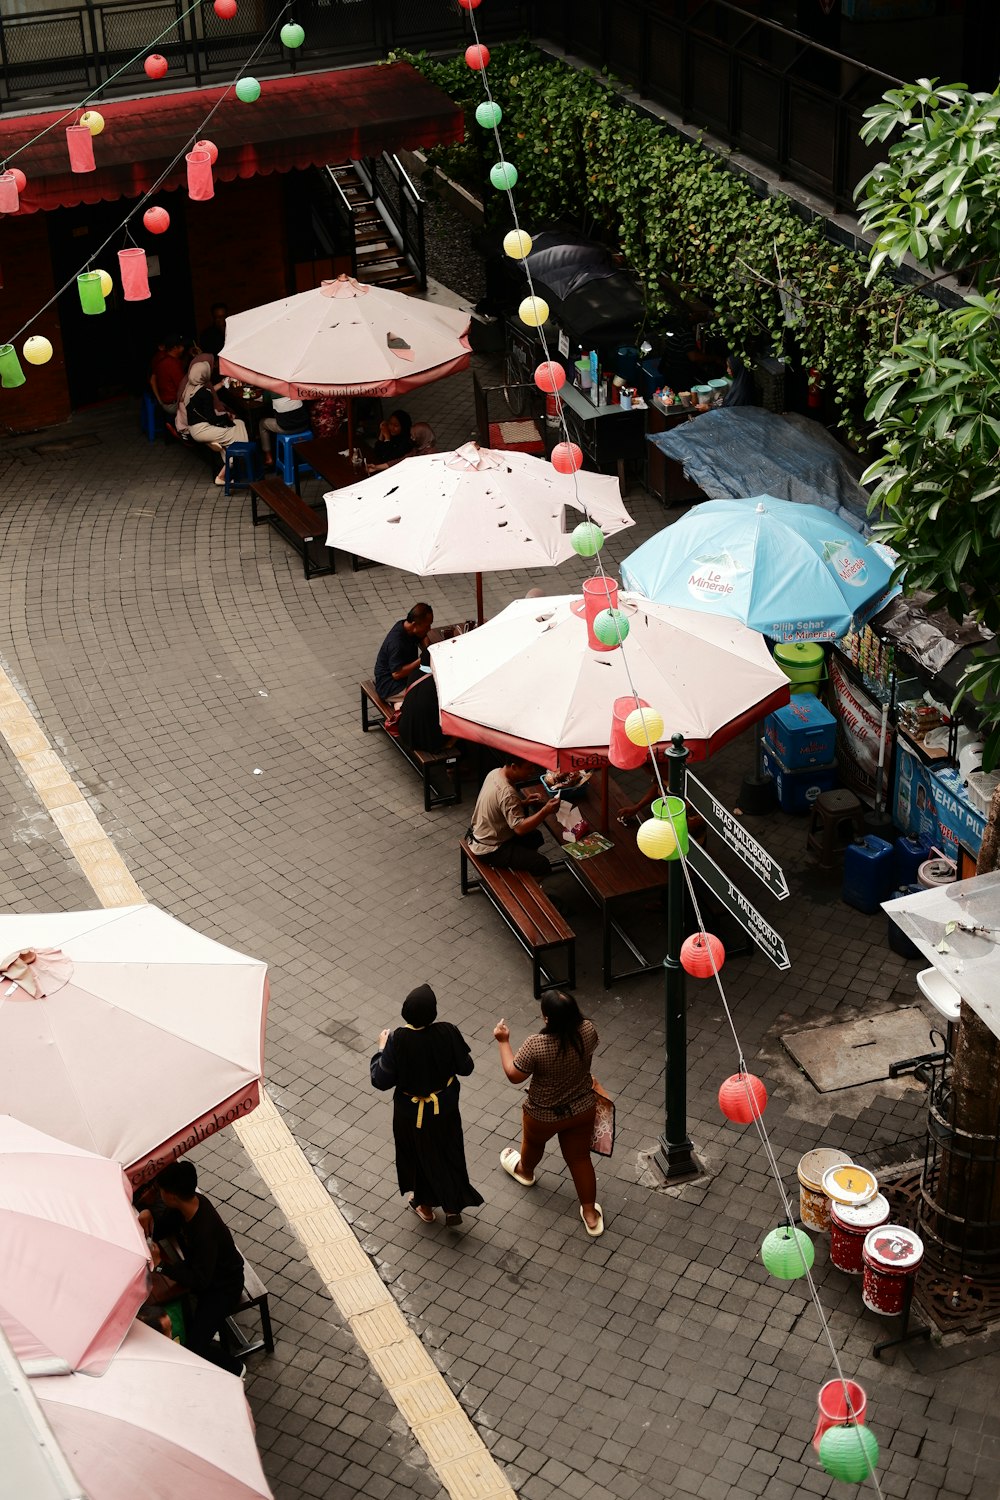 a group of people standing around tables with umbrellas